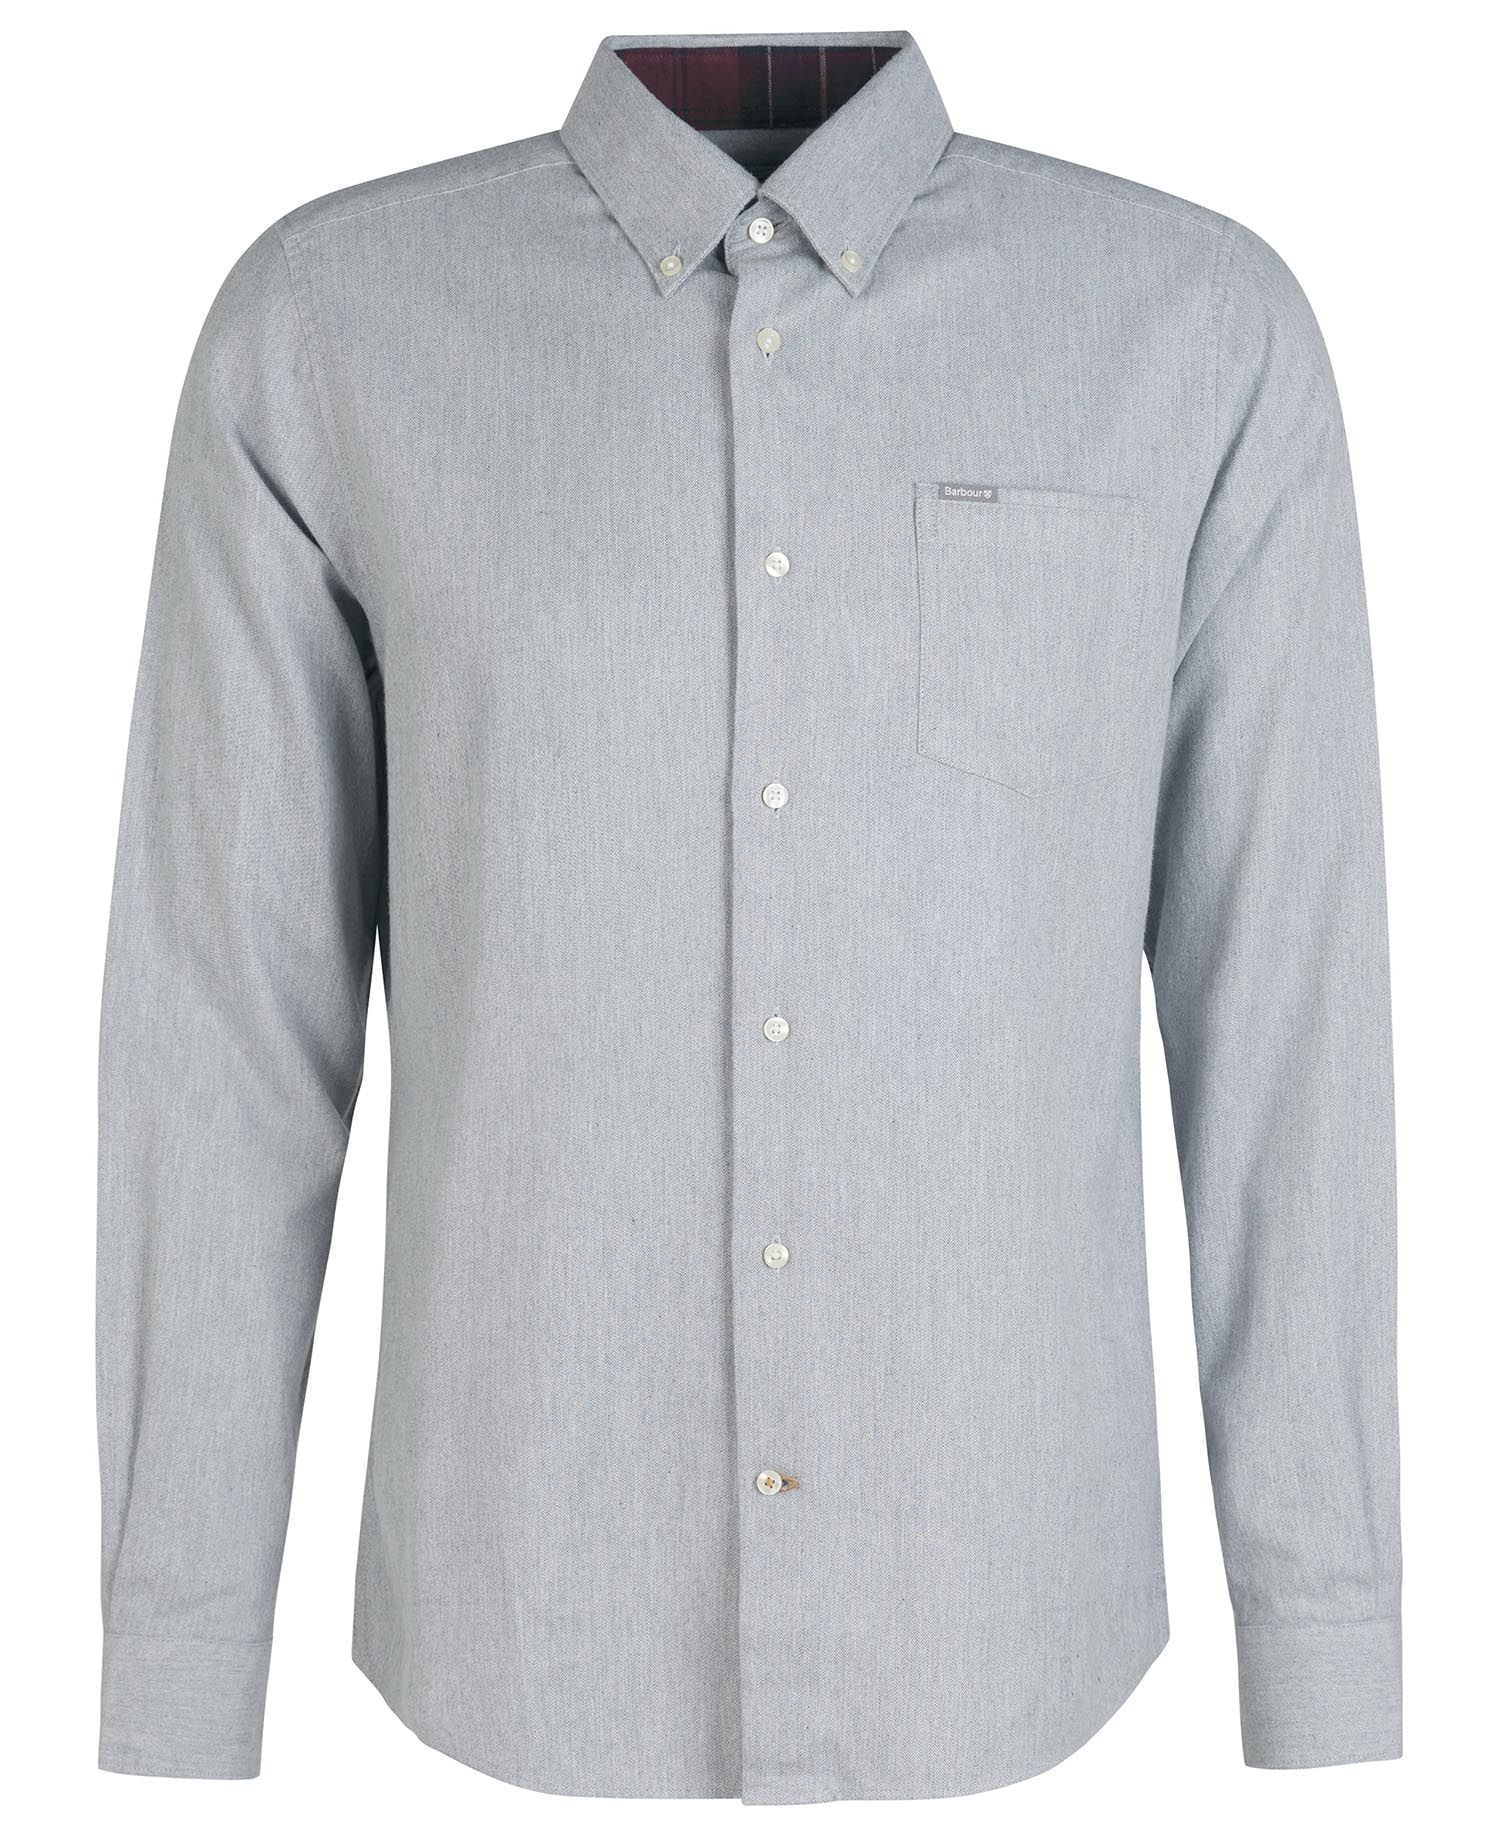 Barbour Seaham Tailored Shirt